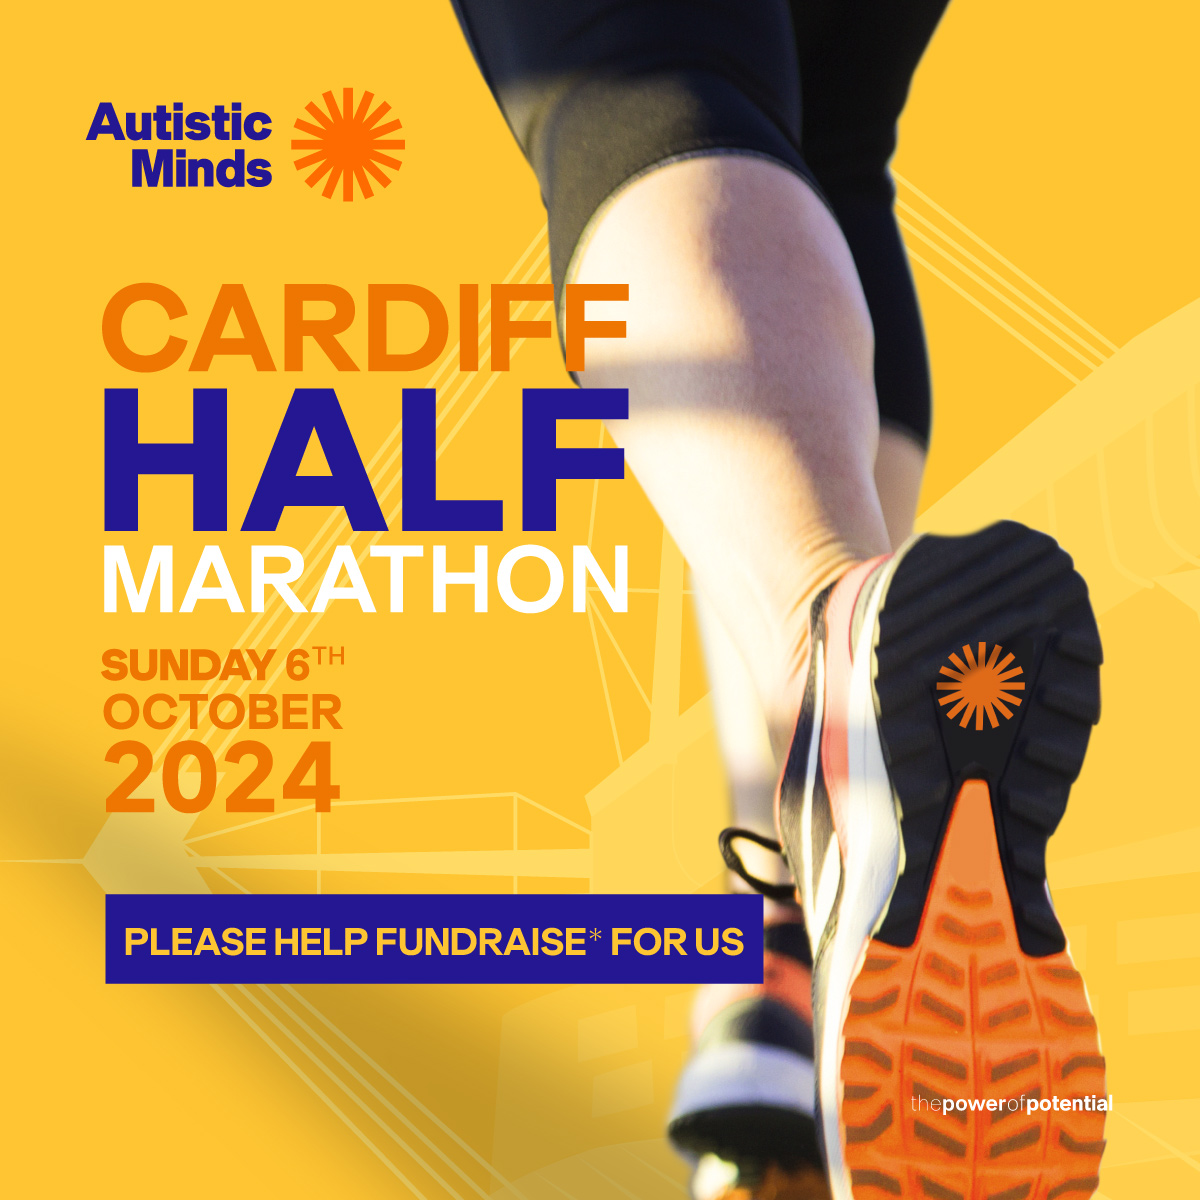 Join the Autistic Minds Team and support us by running the Cardiff Half Marathon 2024